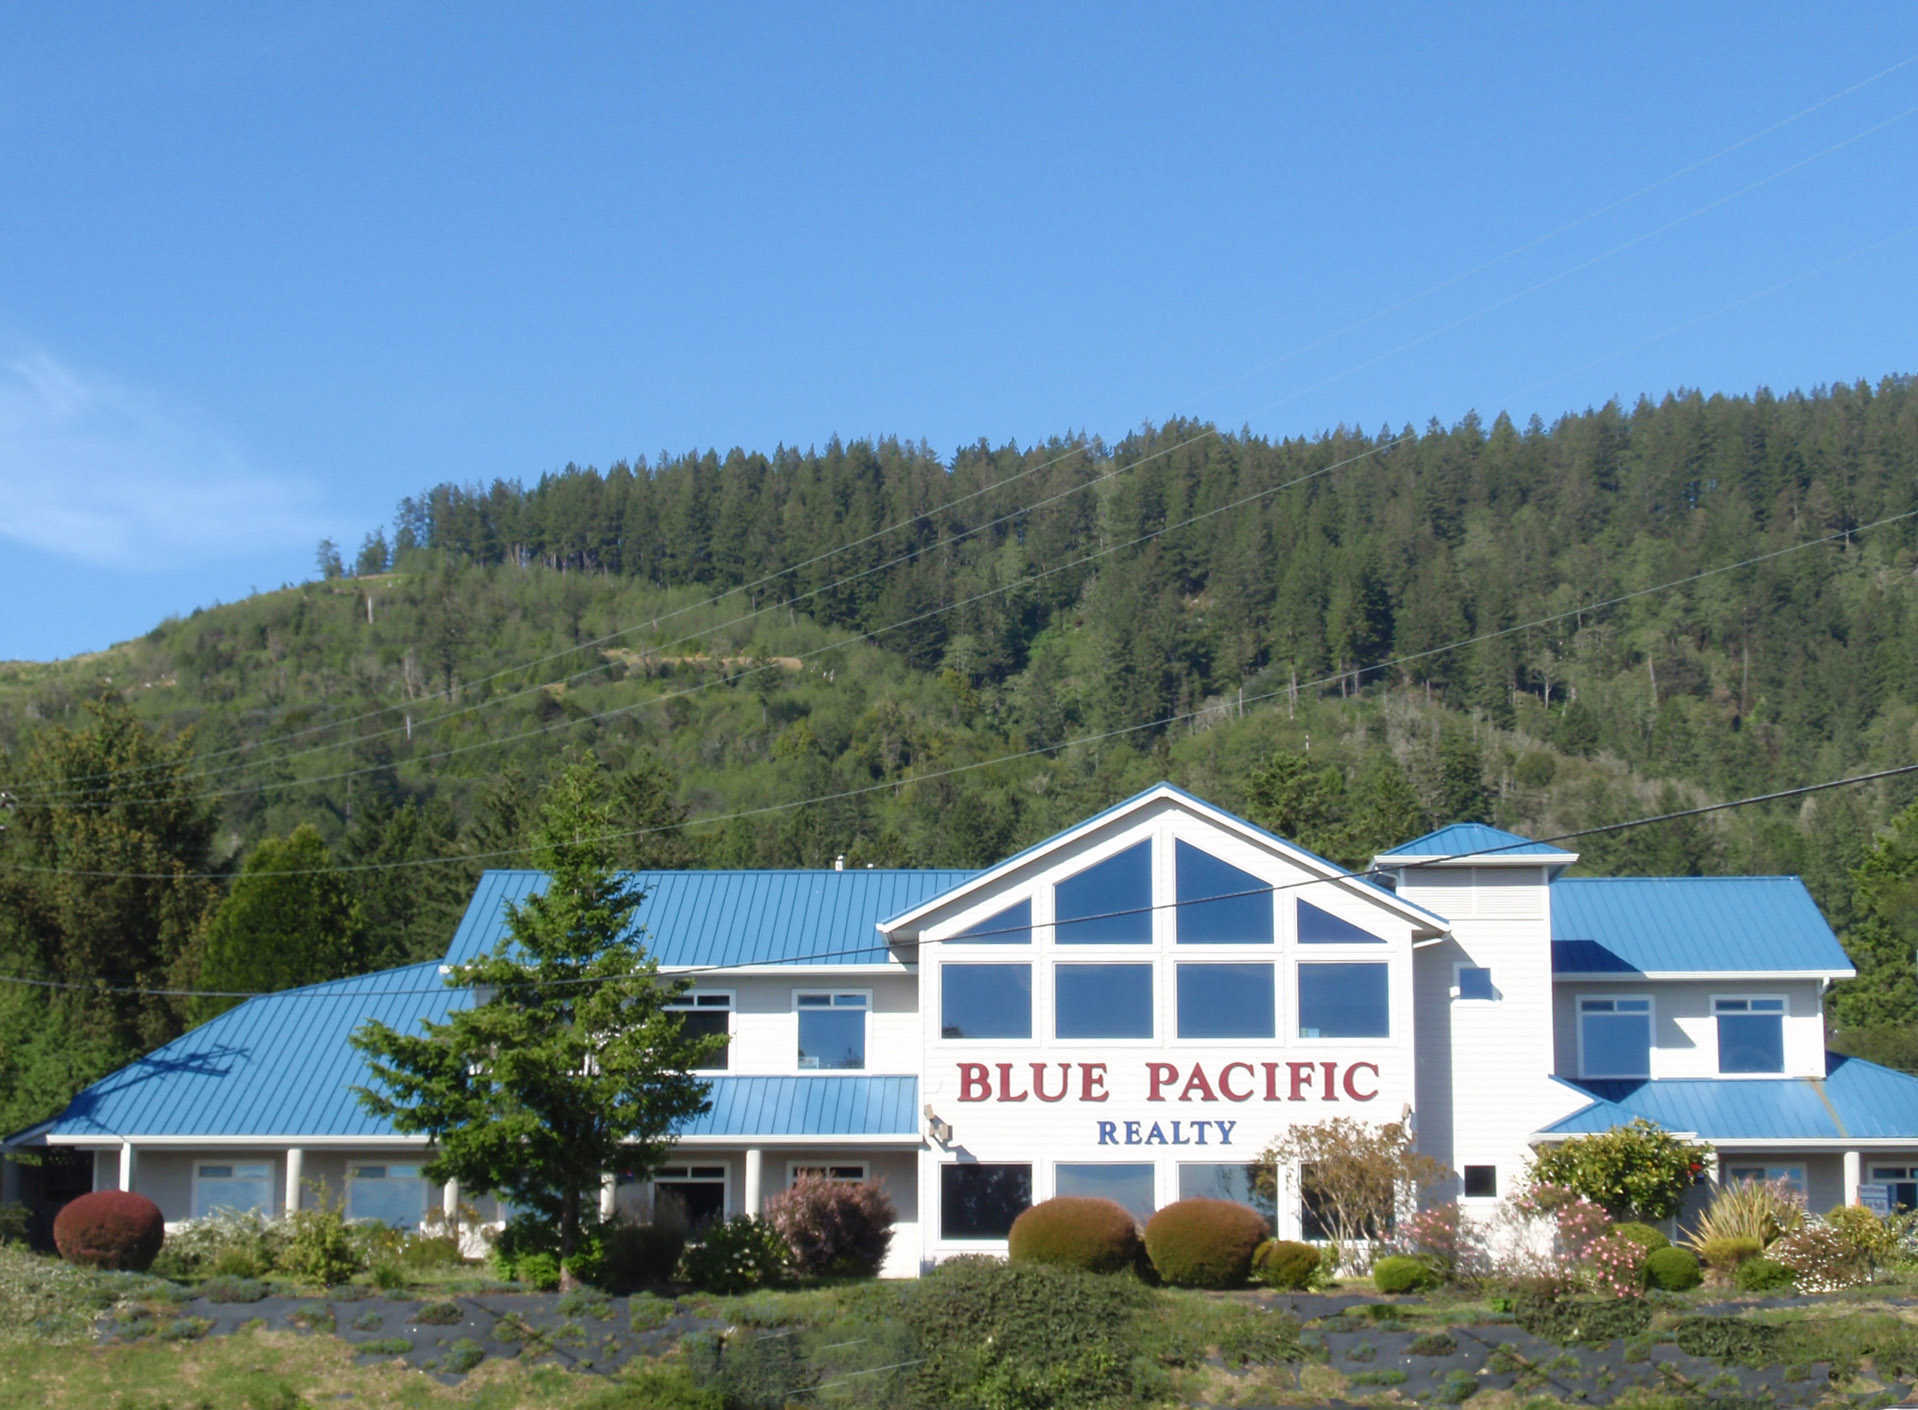 Exterior of Blue Pacific Realty